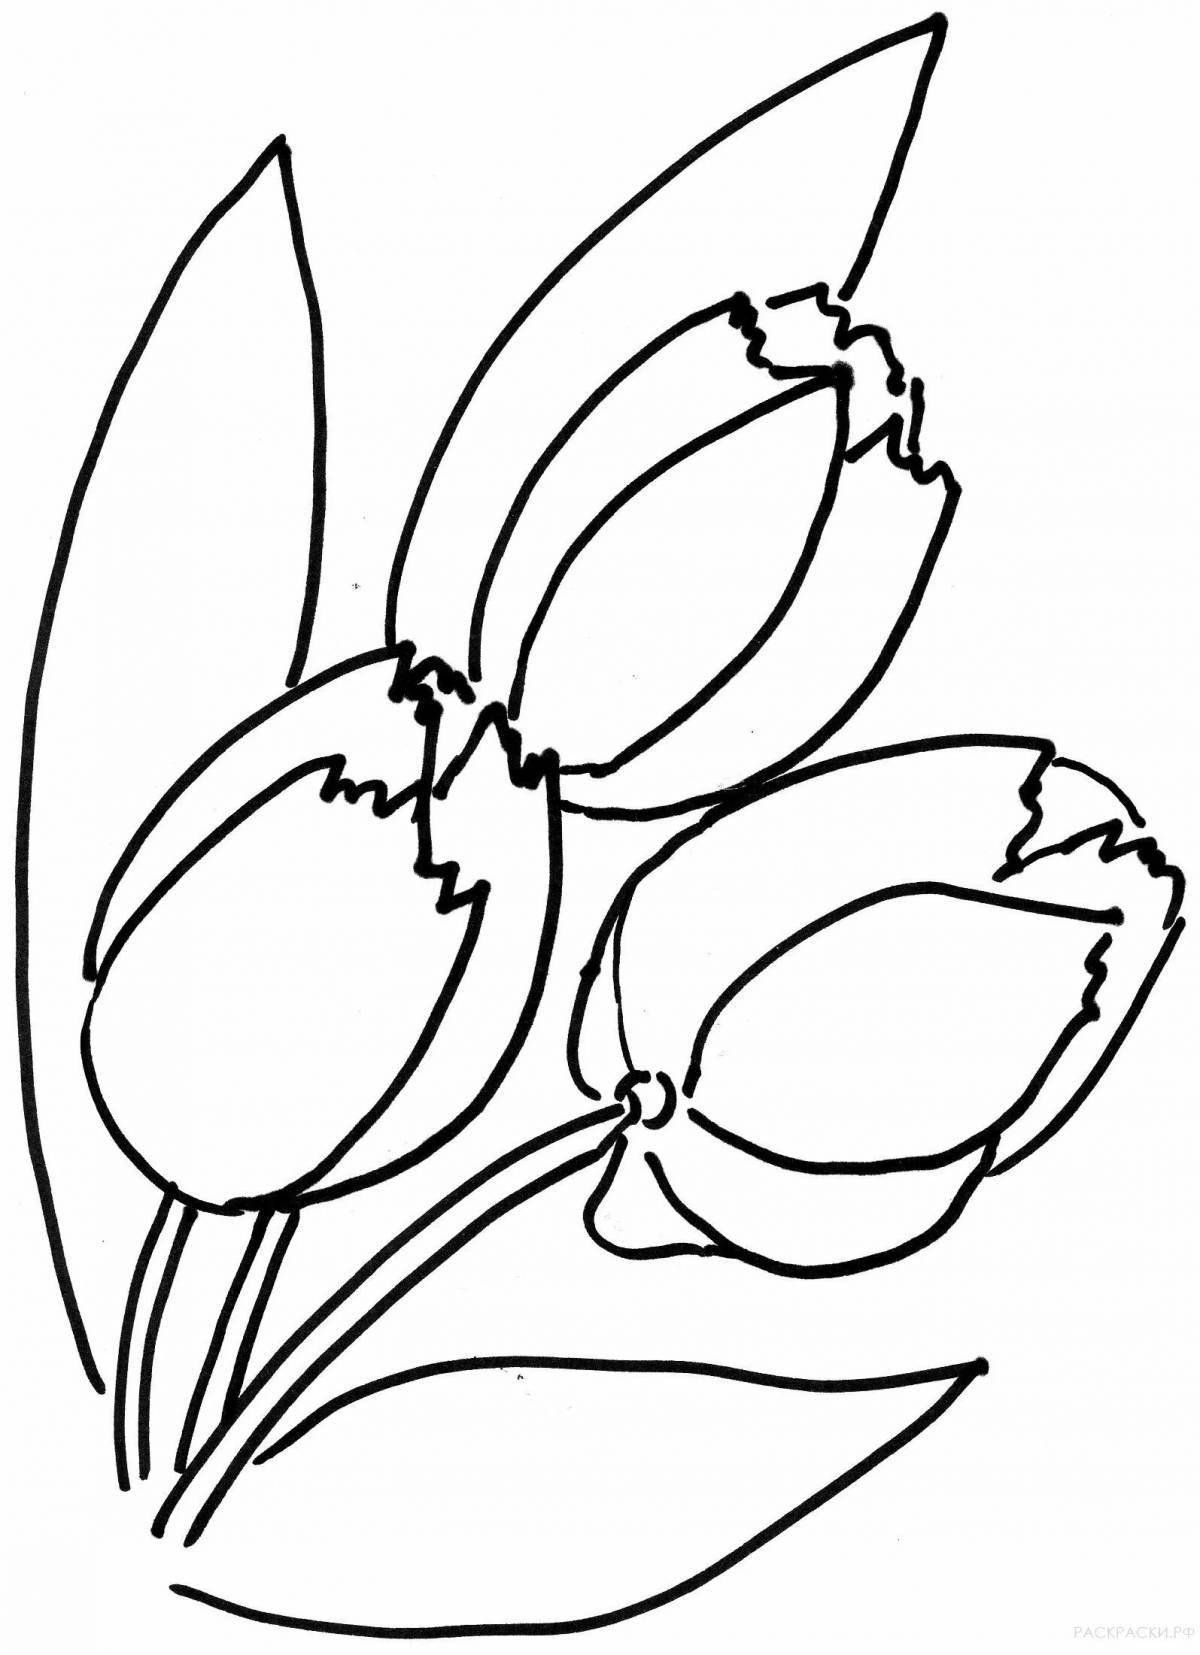 Gorgeous tulip coloring page